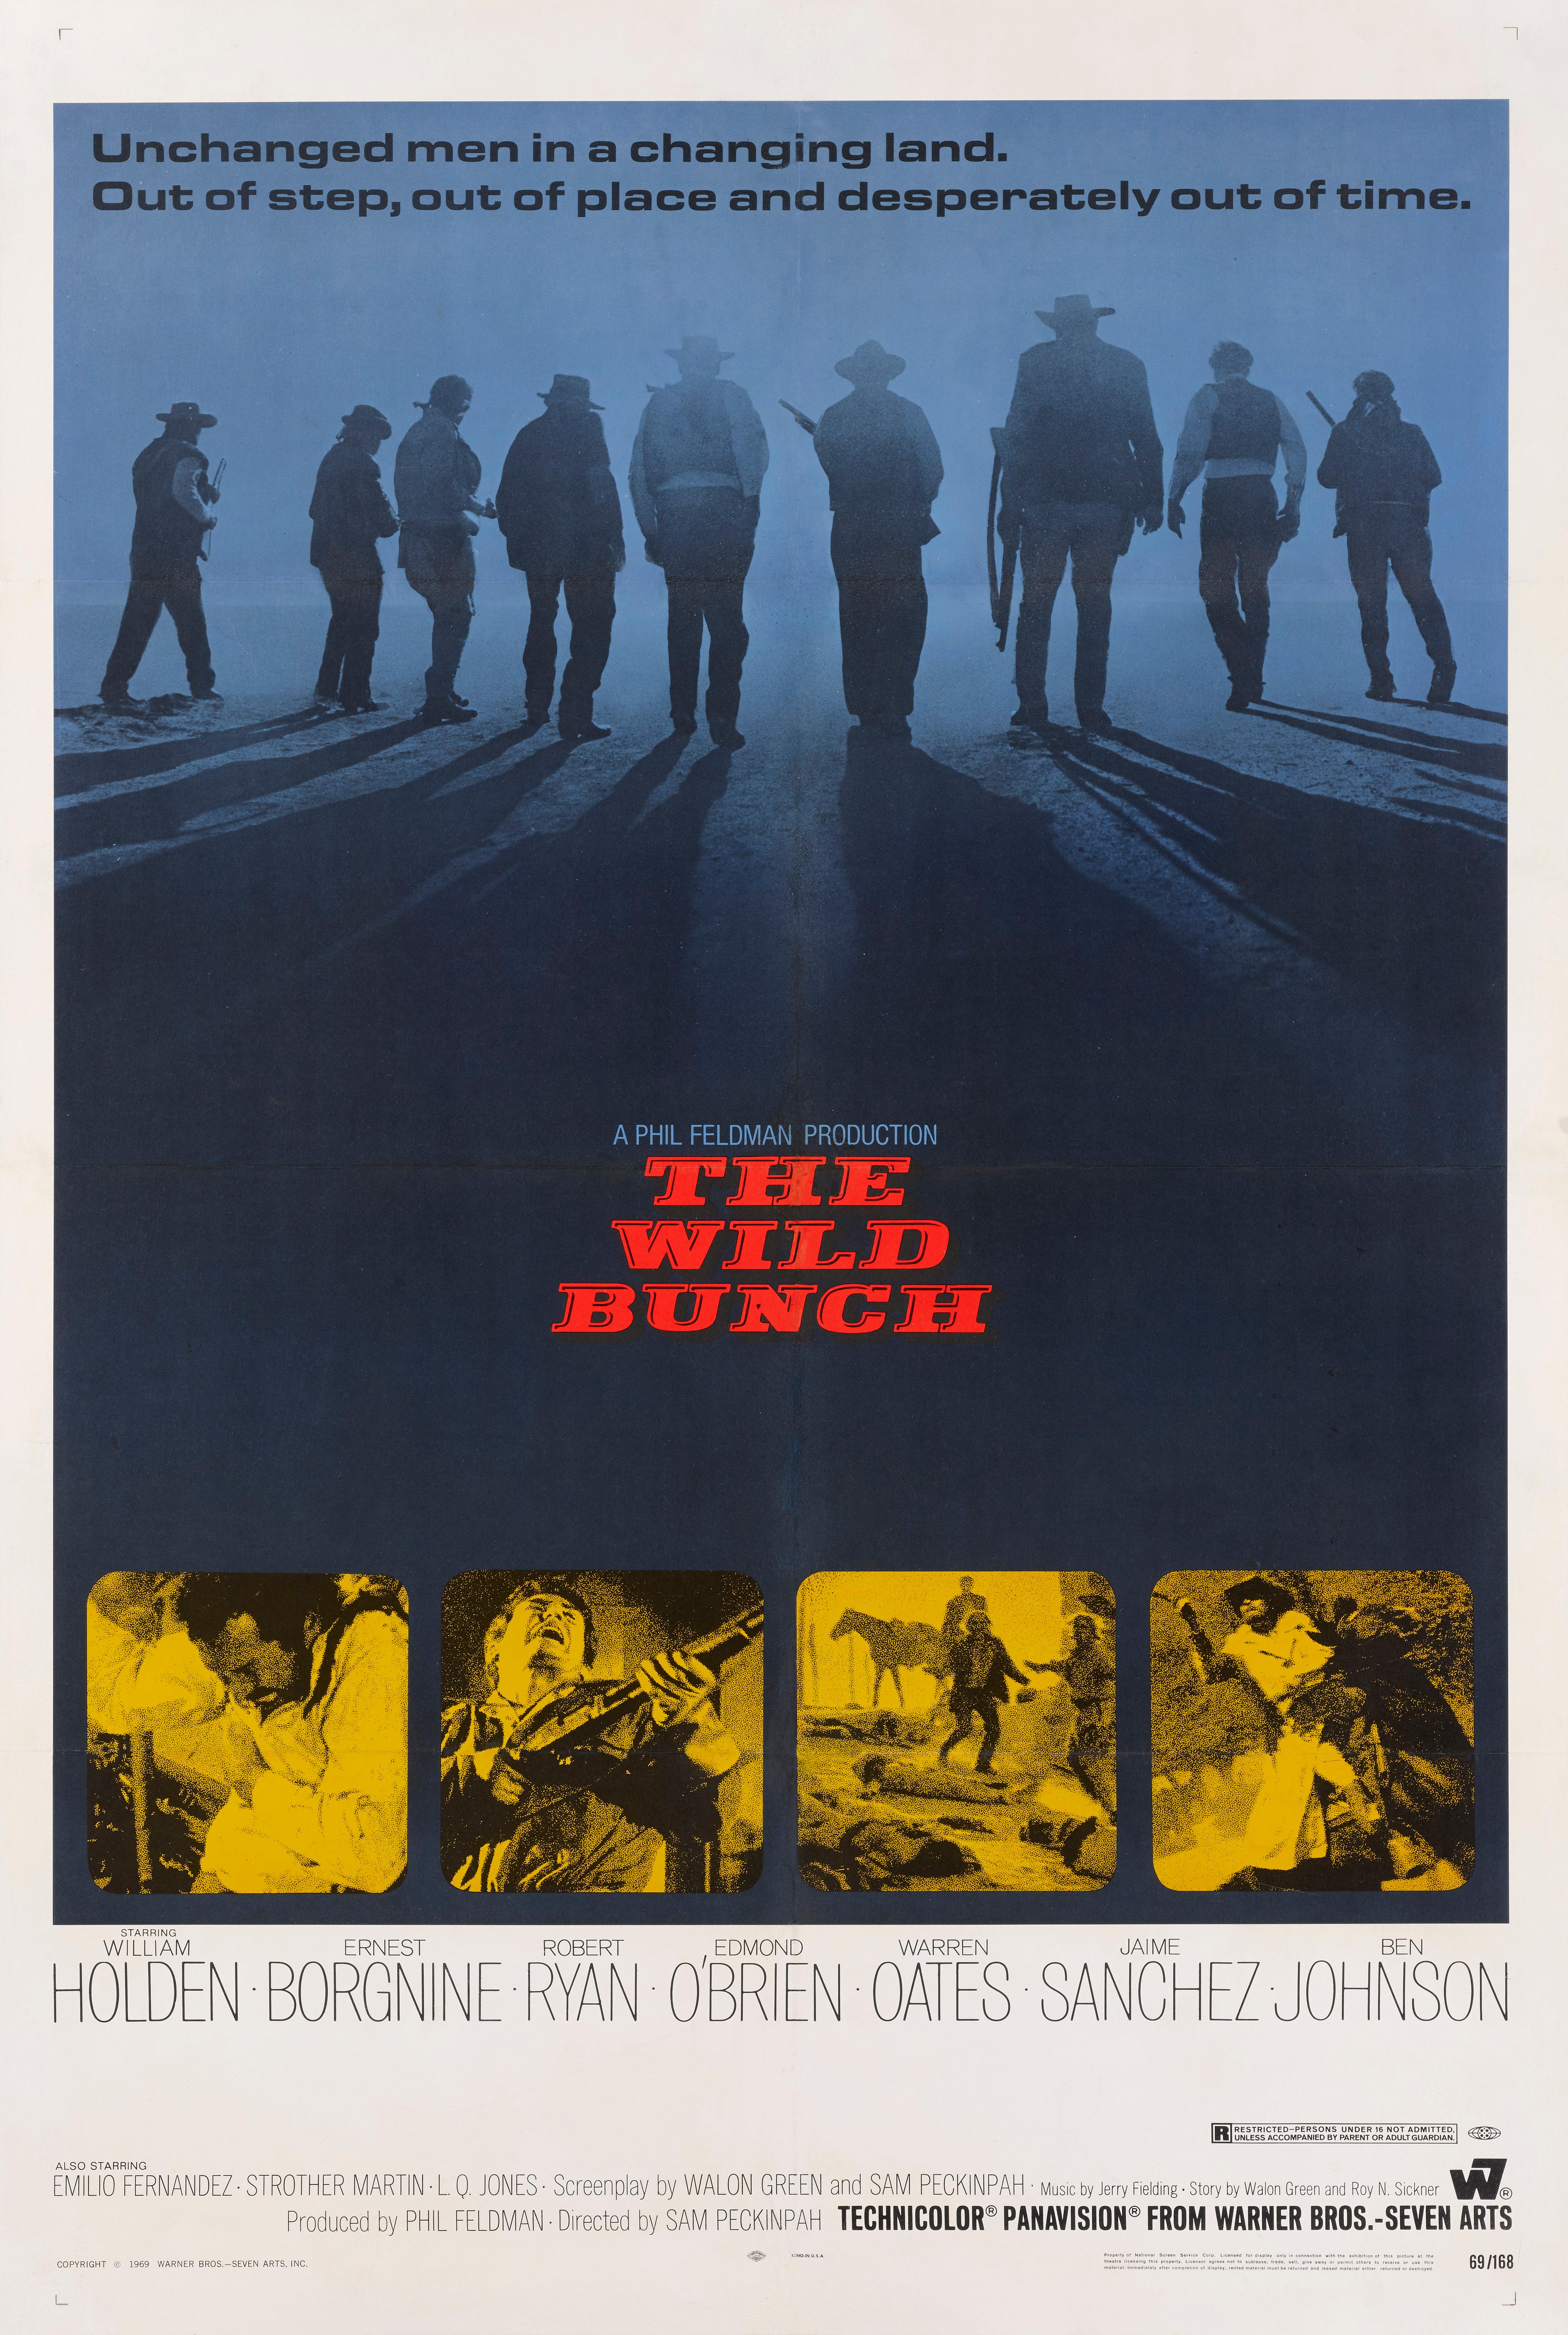 Original US film poster for Sam Peckinpah's classic 1969 western film starring William Holden, Ernest Borgnine, Robert Ryan.
This poster is conservation linen backed and would be shipped rolled in a strong tube.